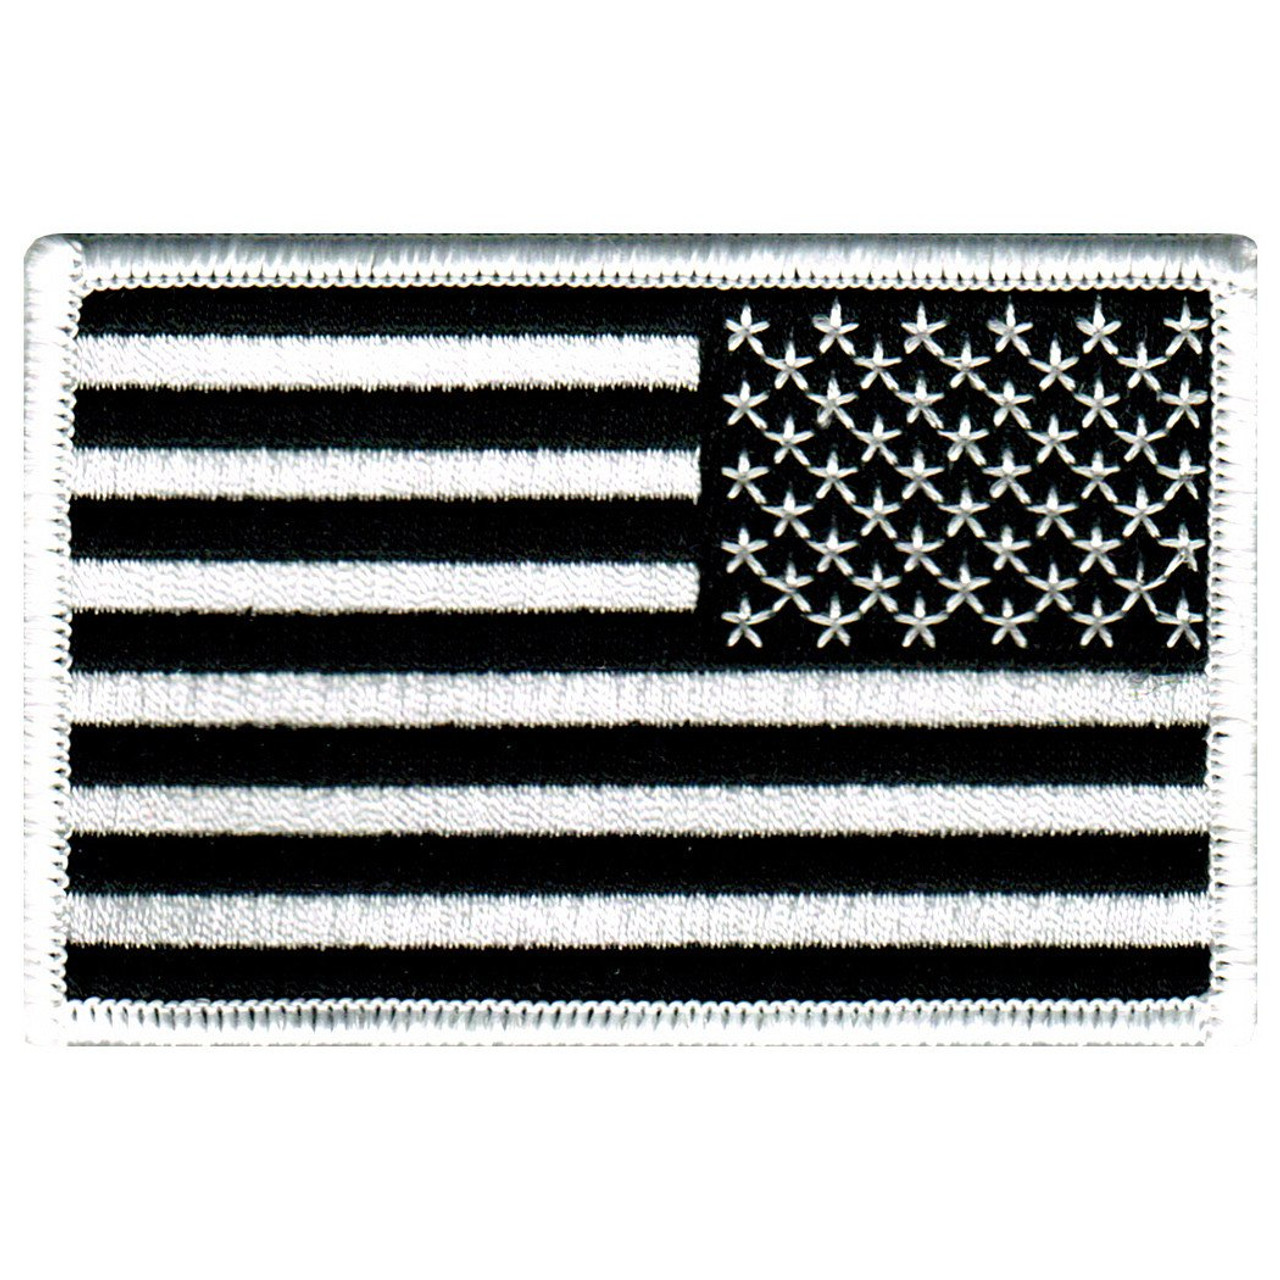 Reversed Black And White American Flag Biker Patch – Quality Biker